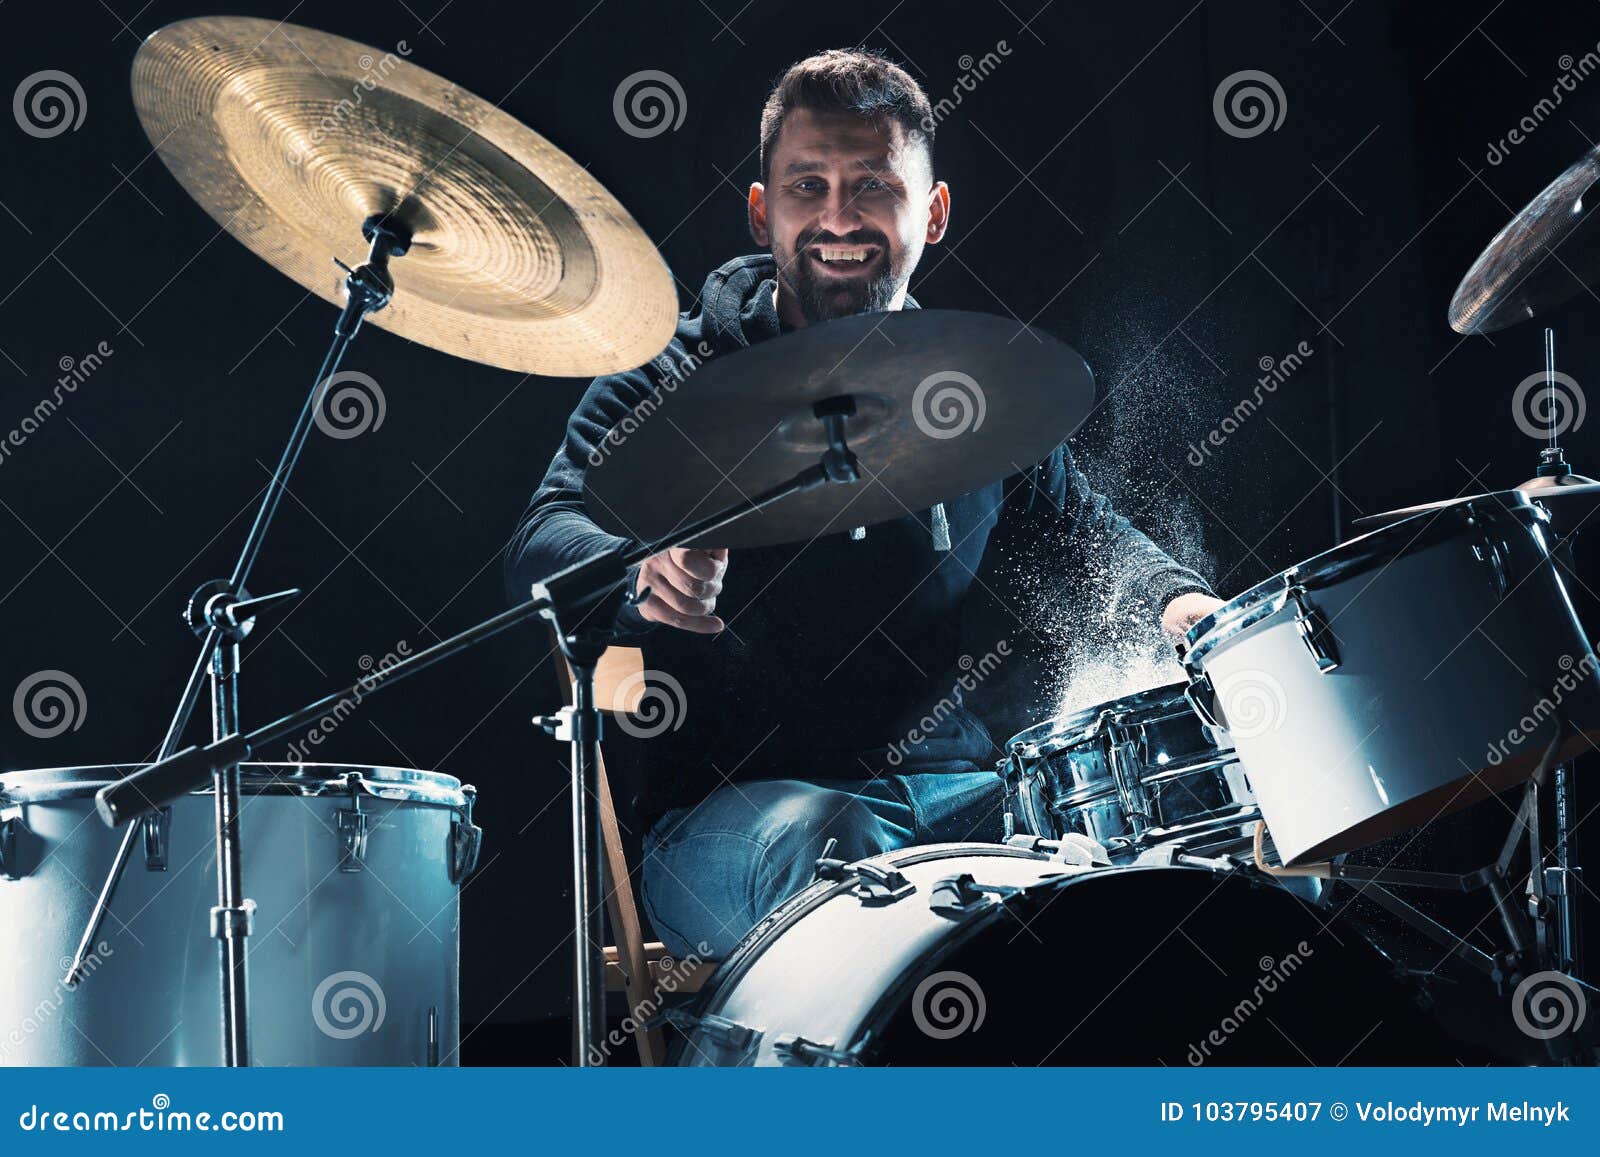 Drummer Rehearsing on Drums before Rock Concert. Man Recording Music on ...